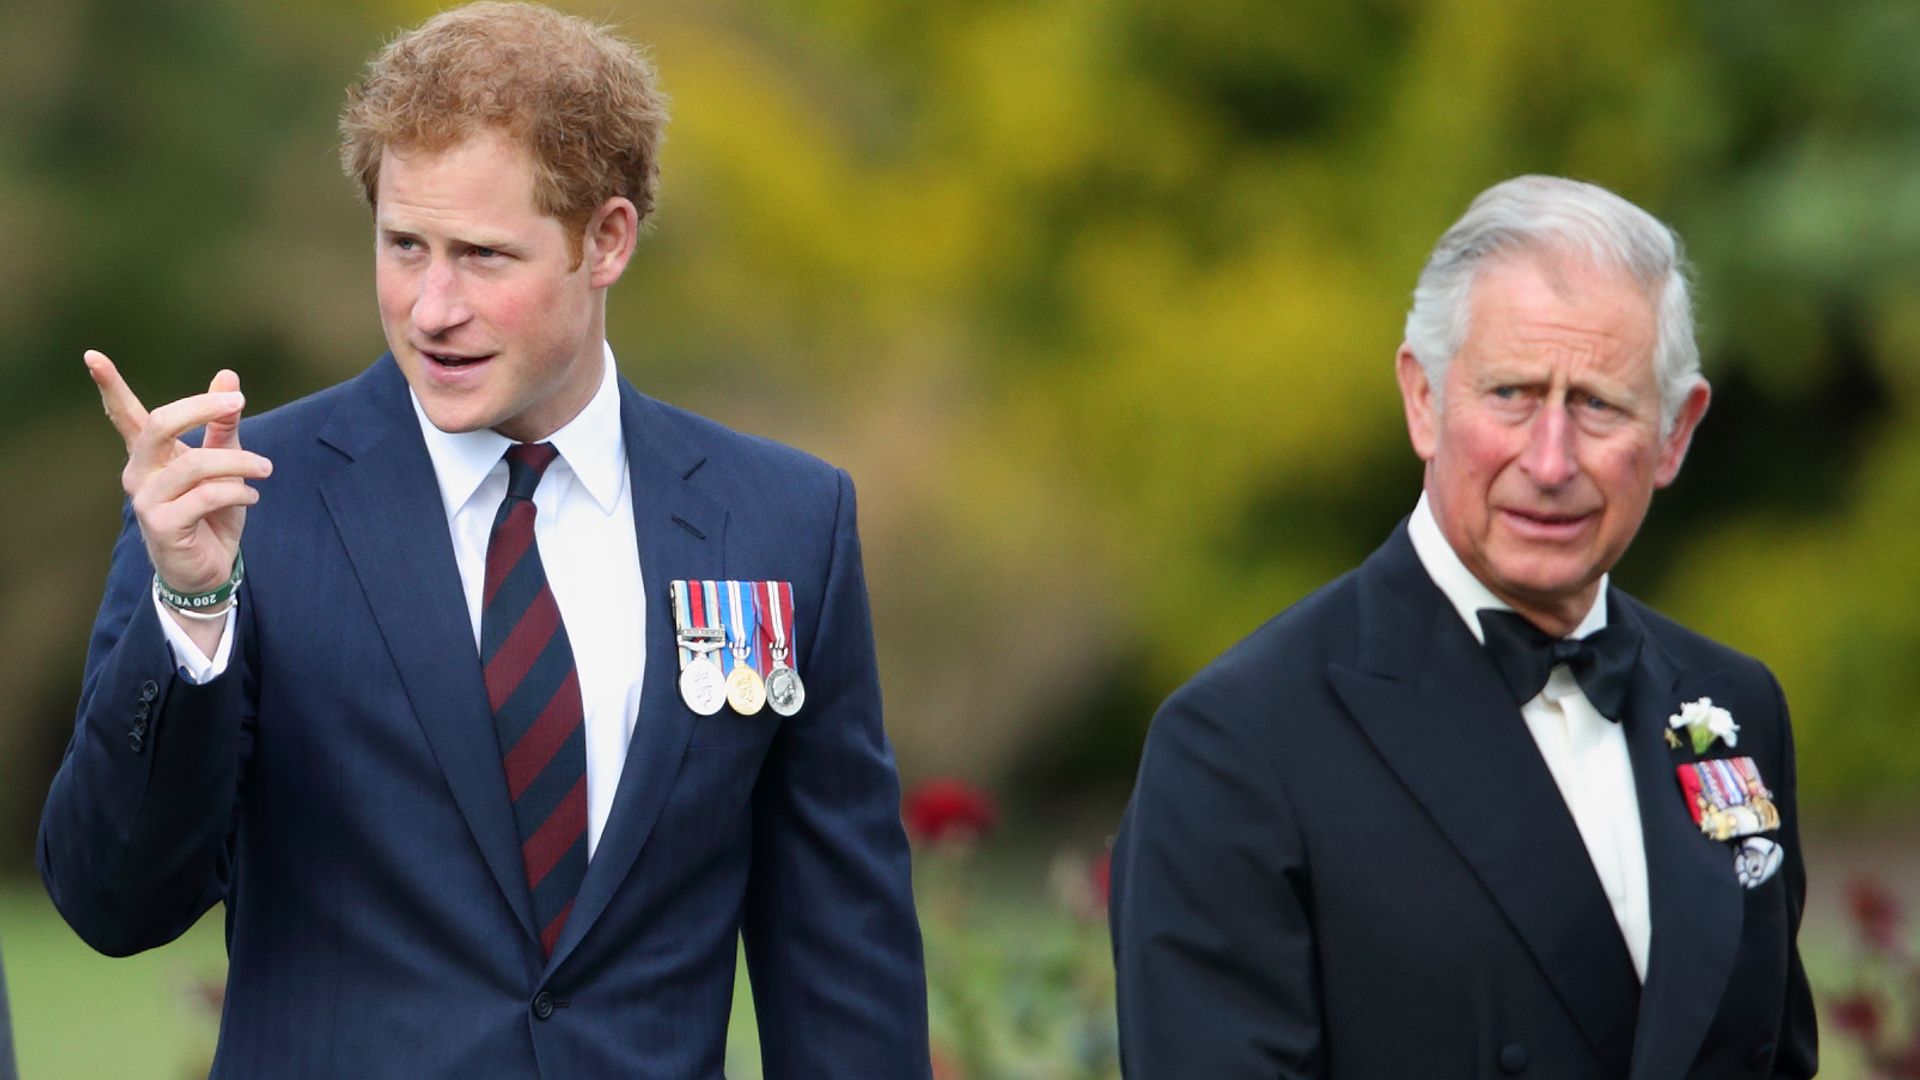 Prince Harry and Prince Charles, Prince of Wales attend the Gurkha 200 Pageant in 2015 